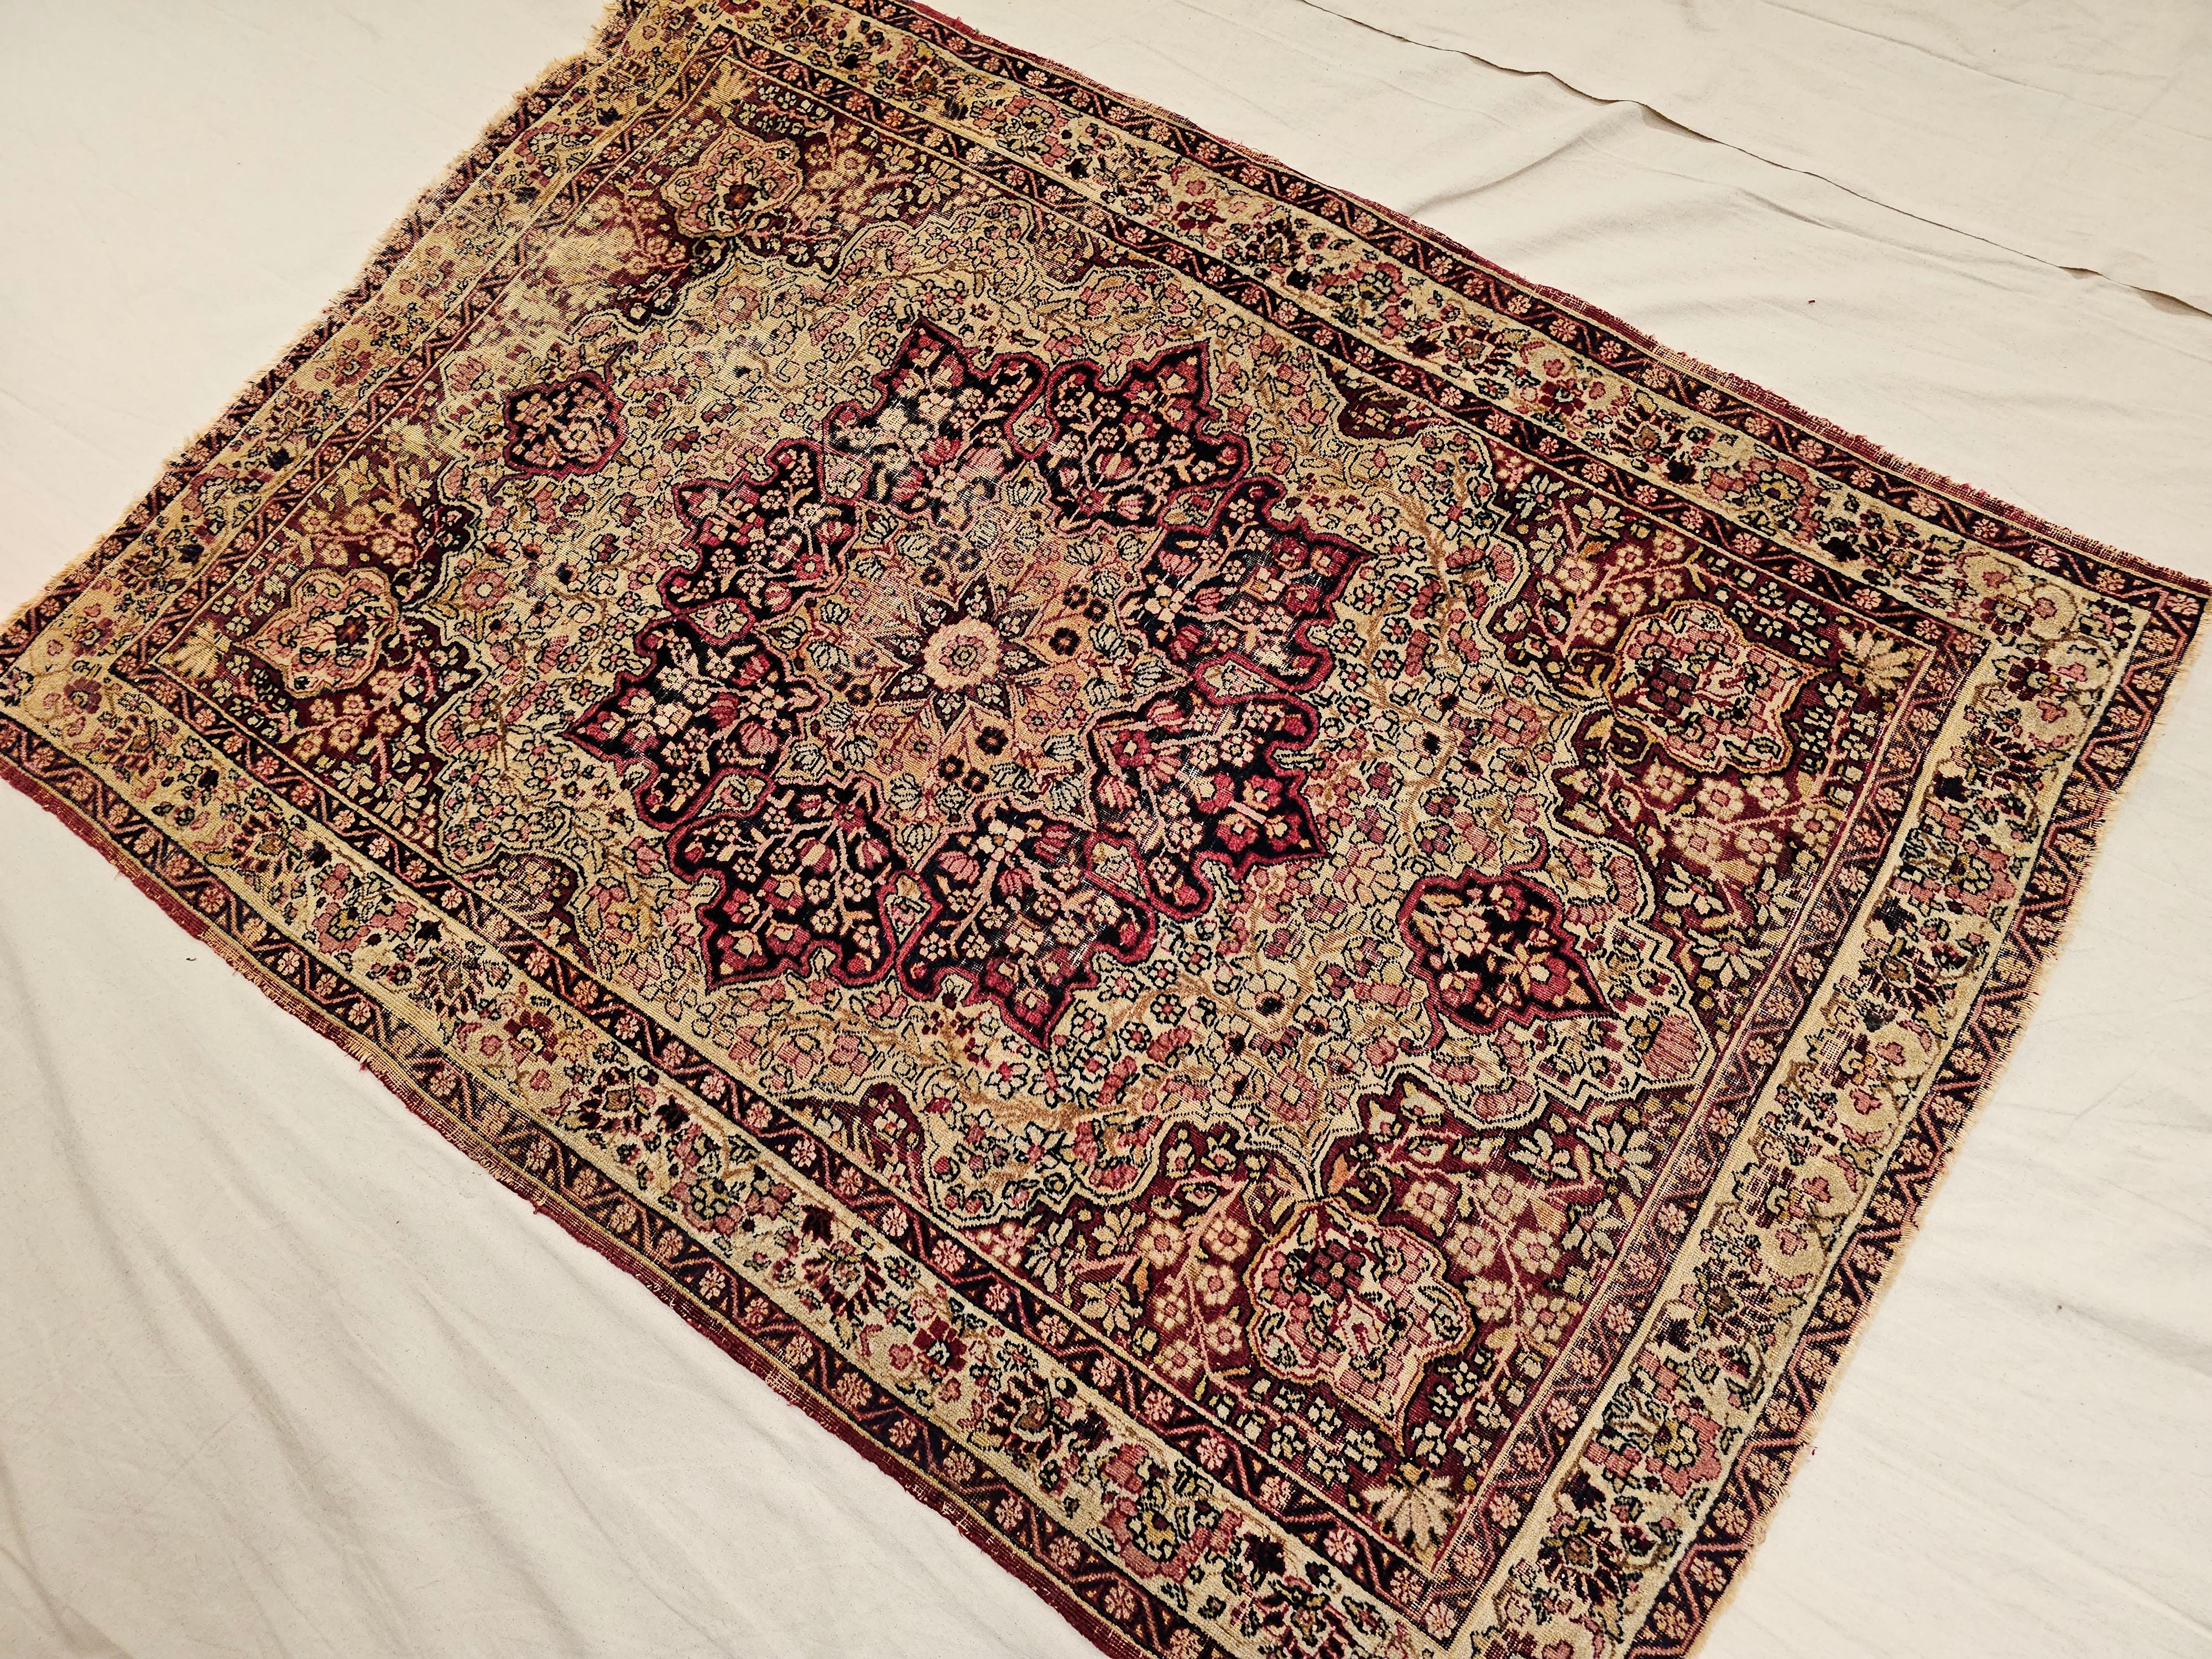 19th Century Persian Kerman Lavar in Floral Pattern in Red, Pale Yellow, Black For Sale 2